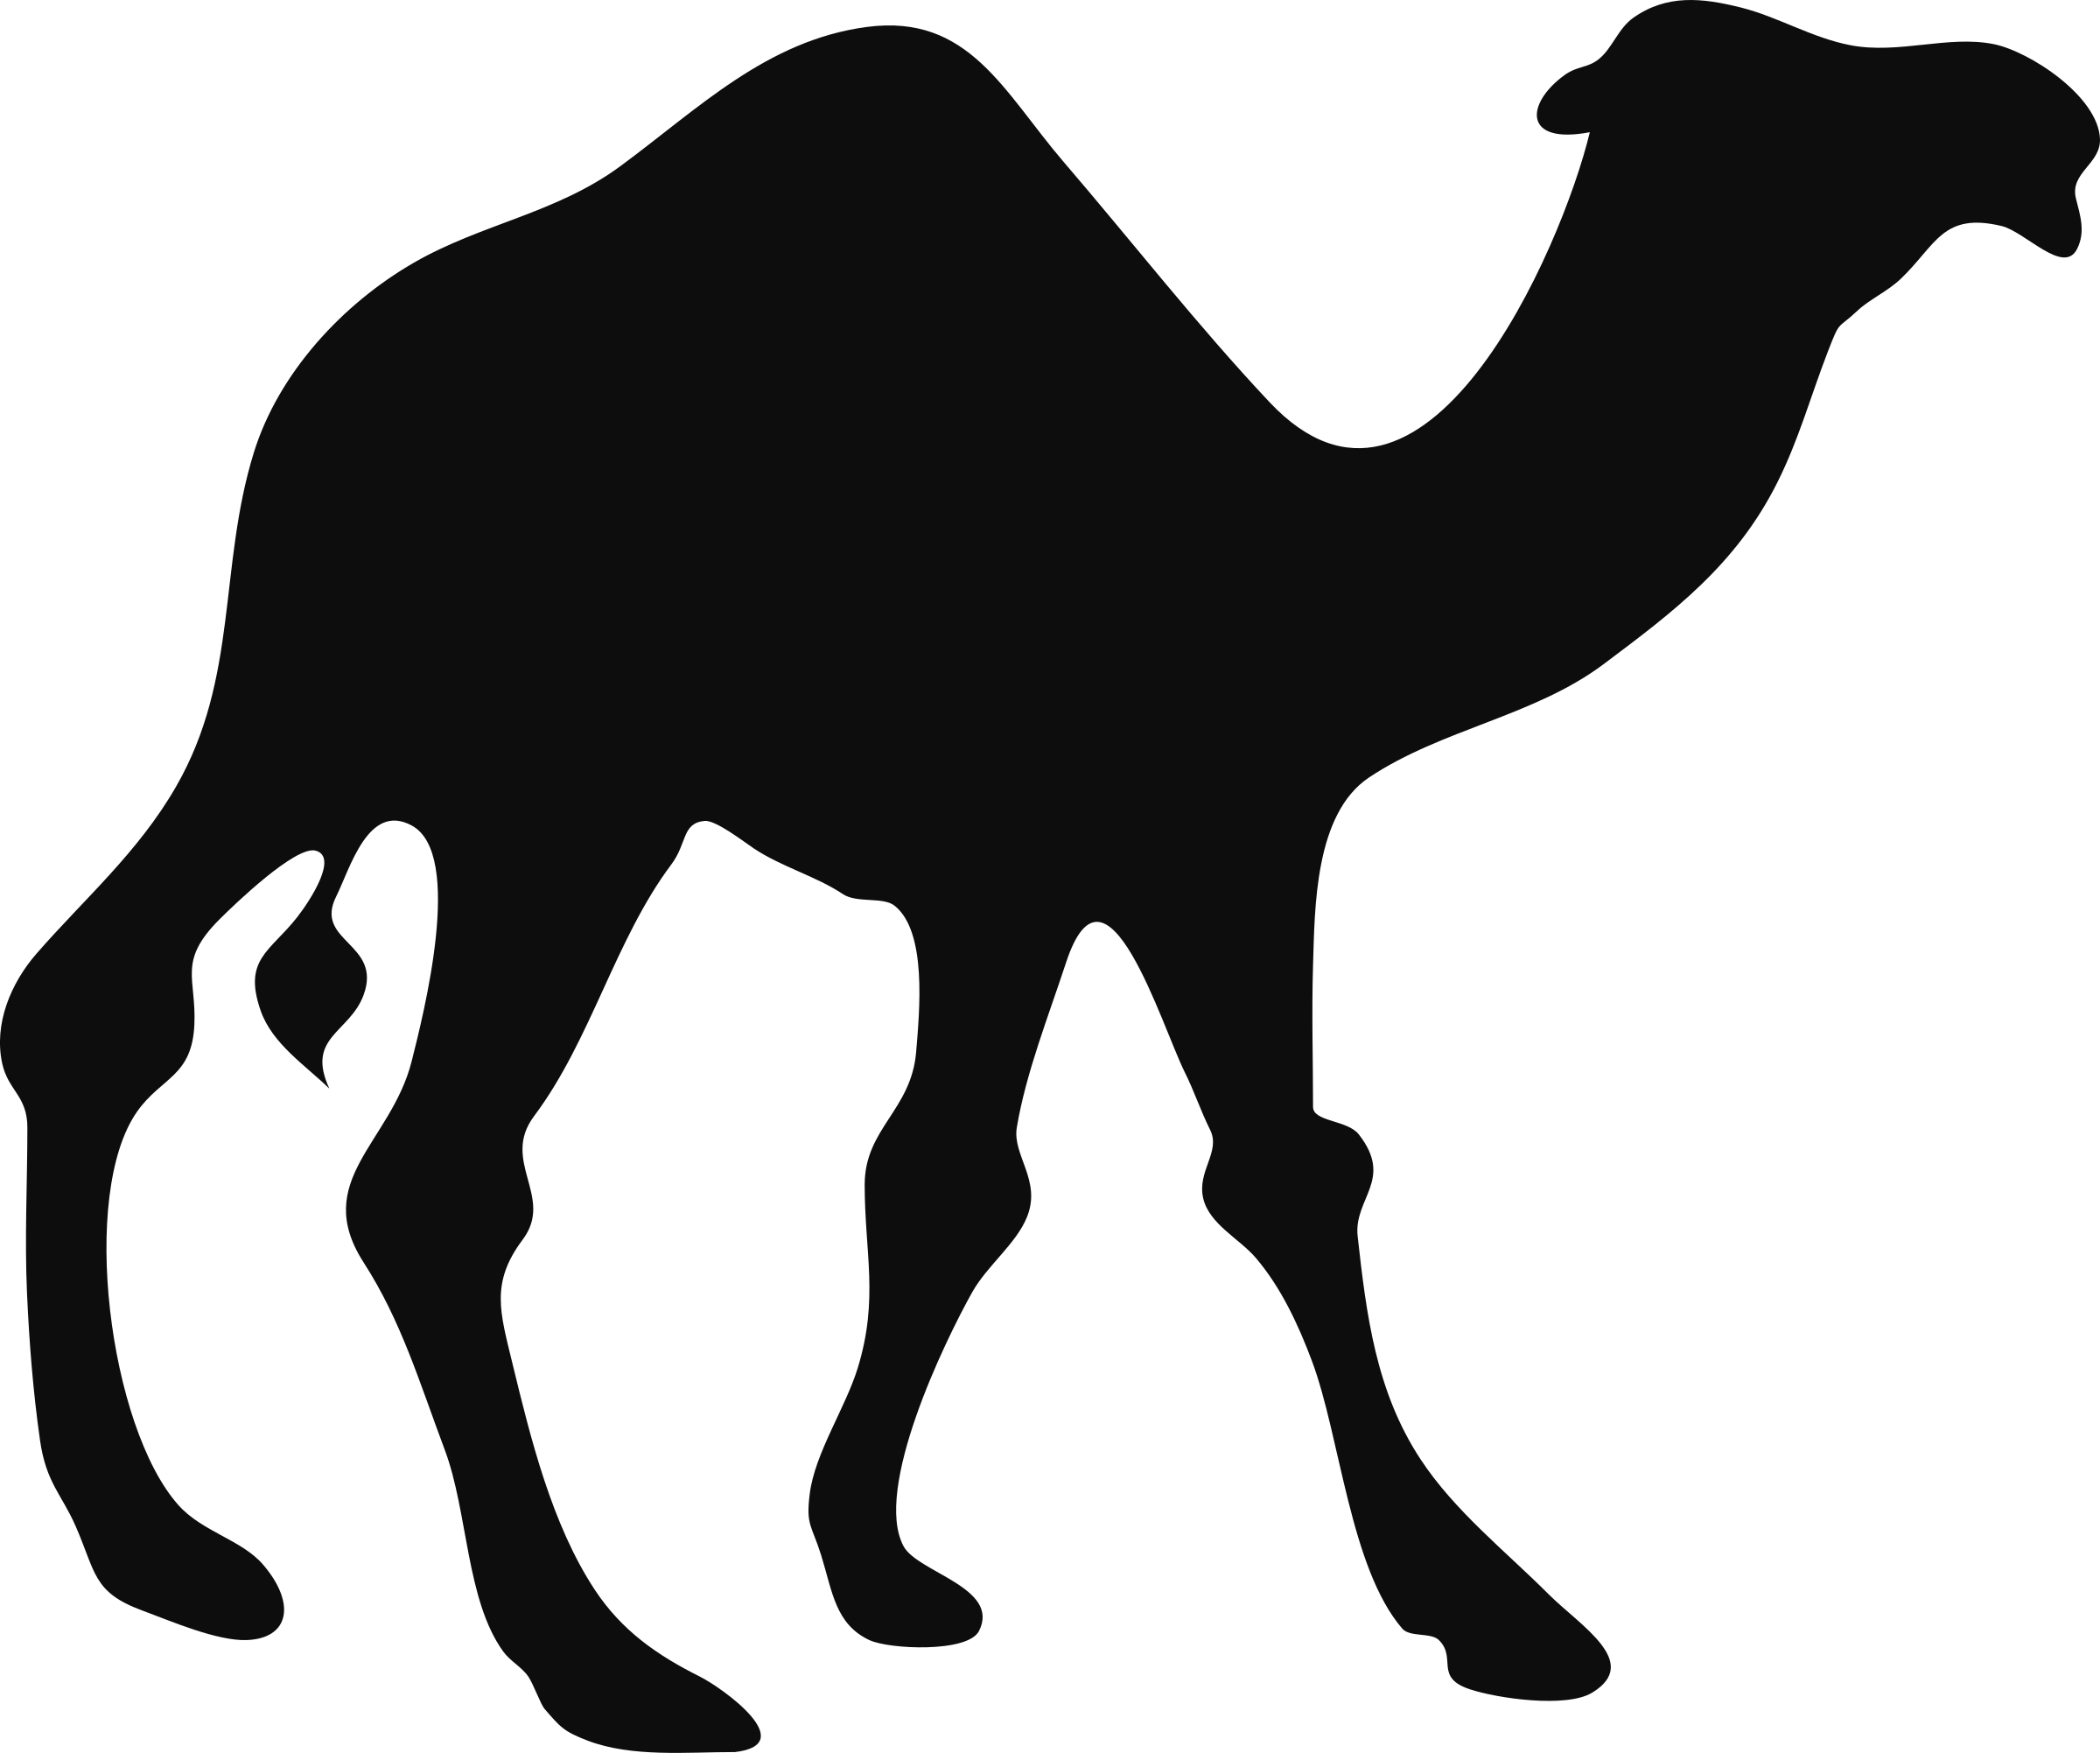 Camel Silhouette Vector Graphic image